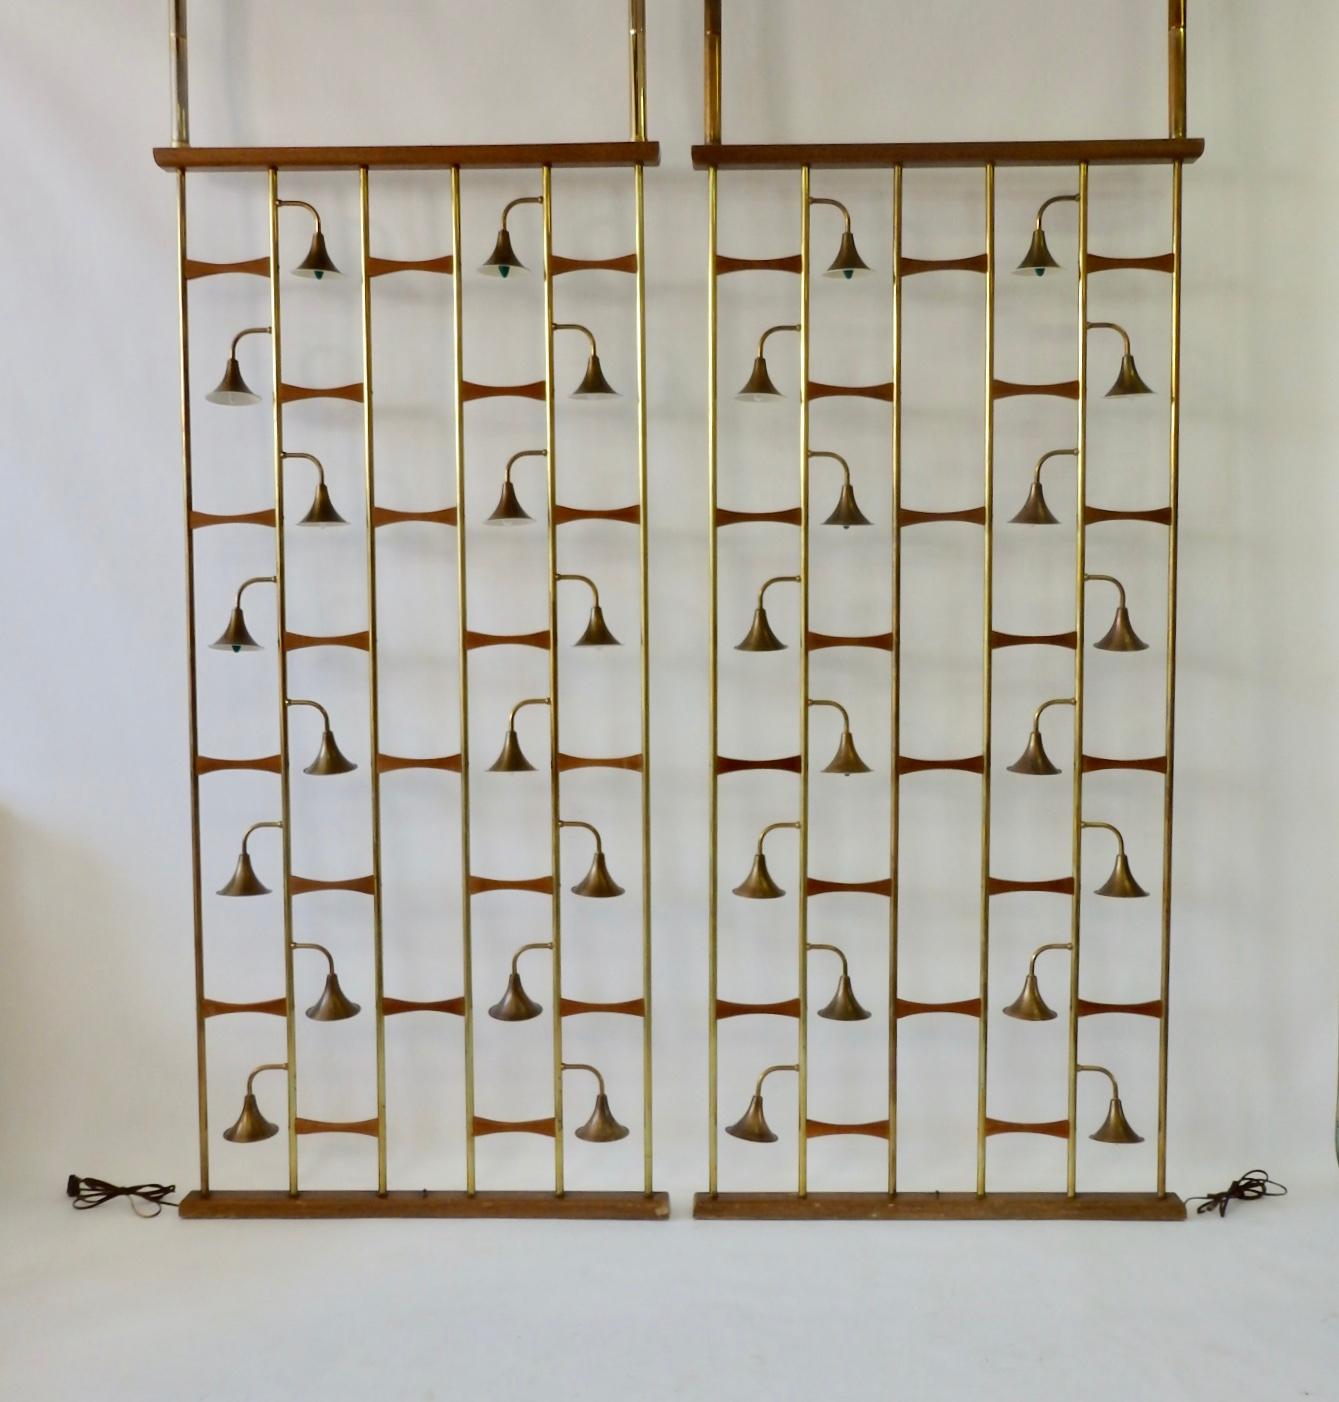 Pair of brass rod with walnut spacer room dividers. Each has 16 lights. Pieces are designed to compression fit between floor and ceiling with spring loaded shafts at top.